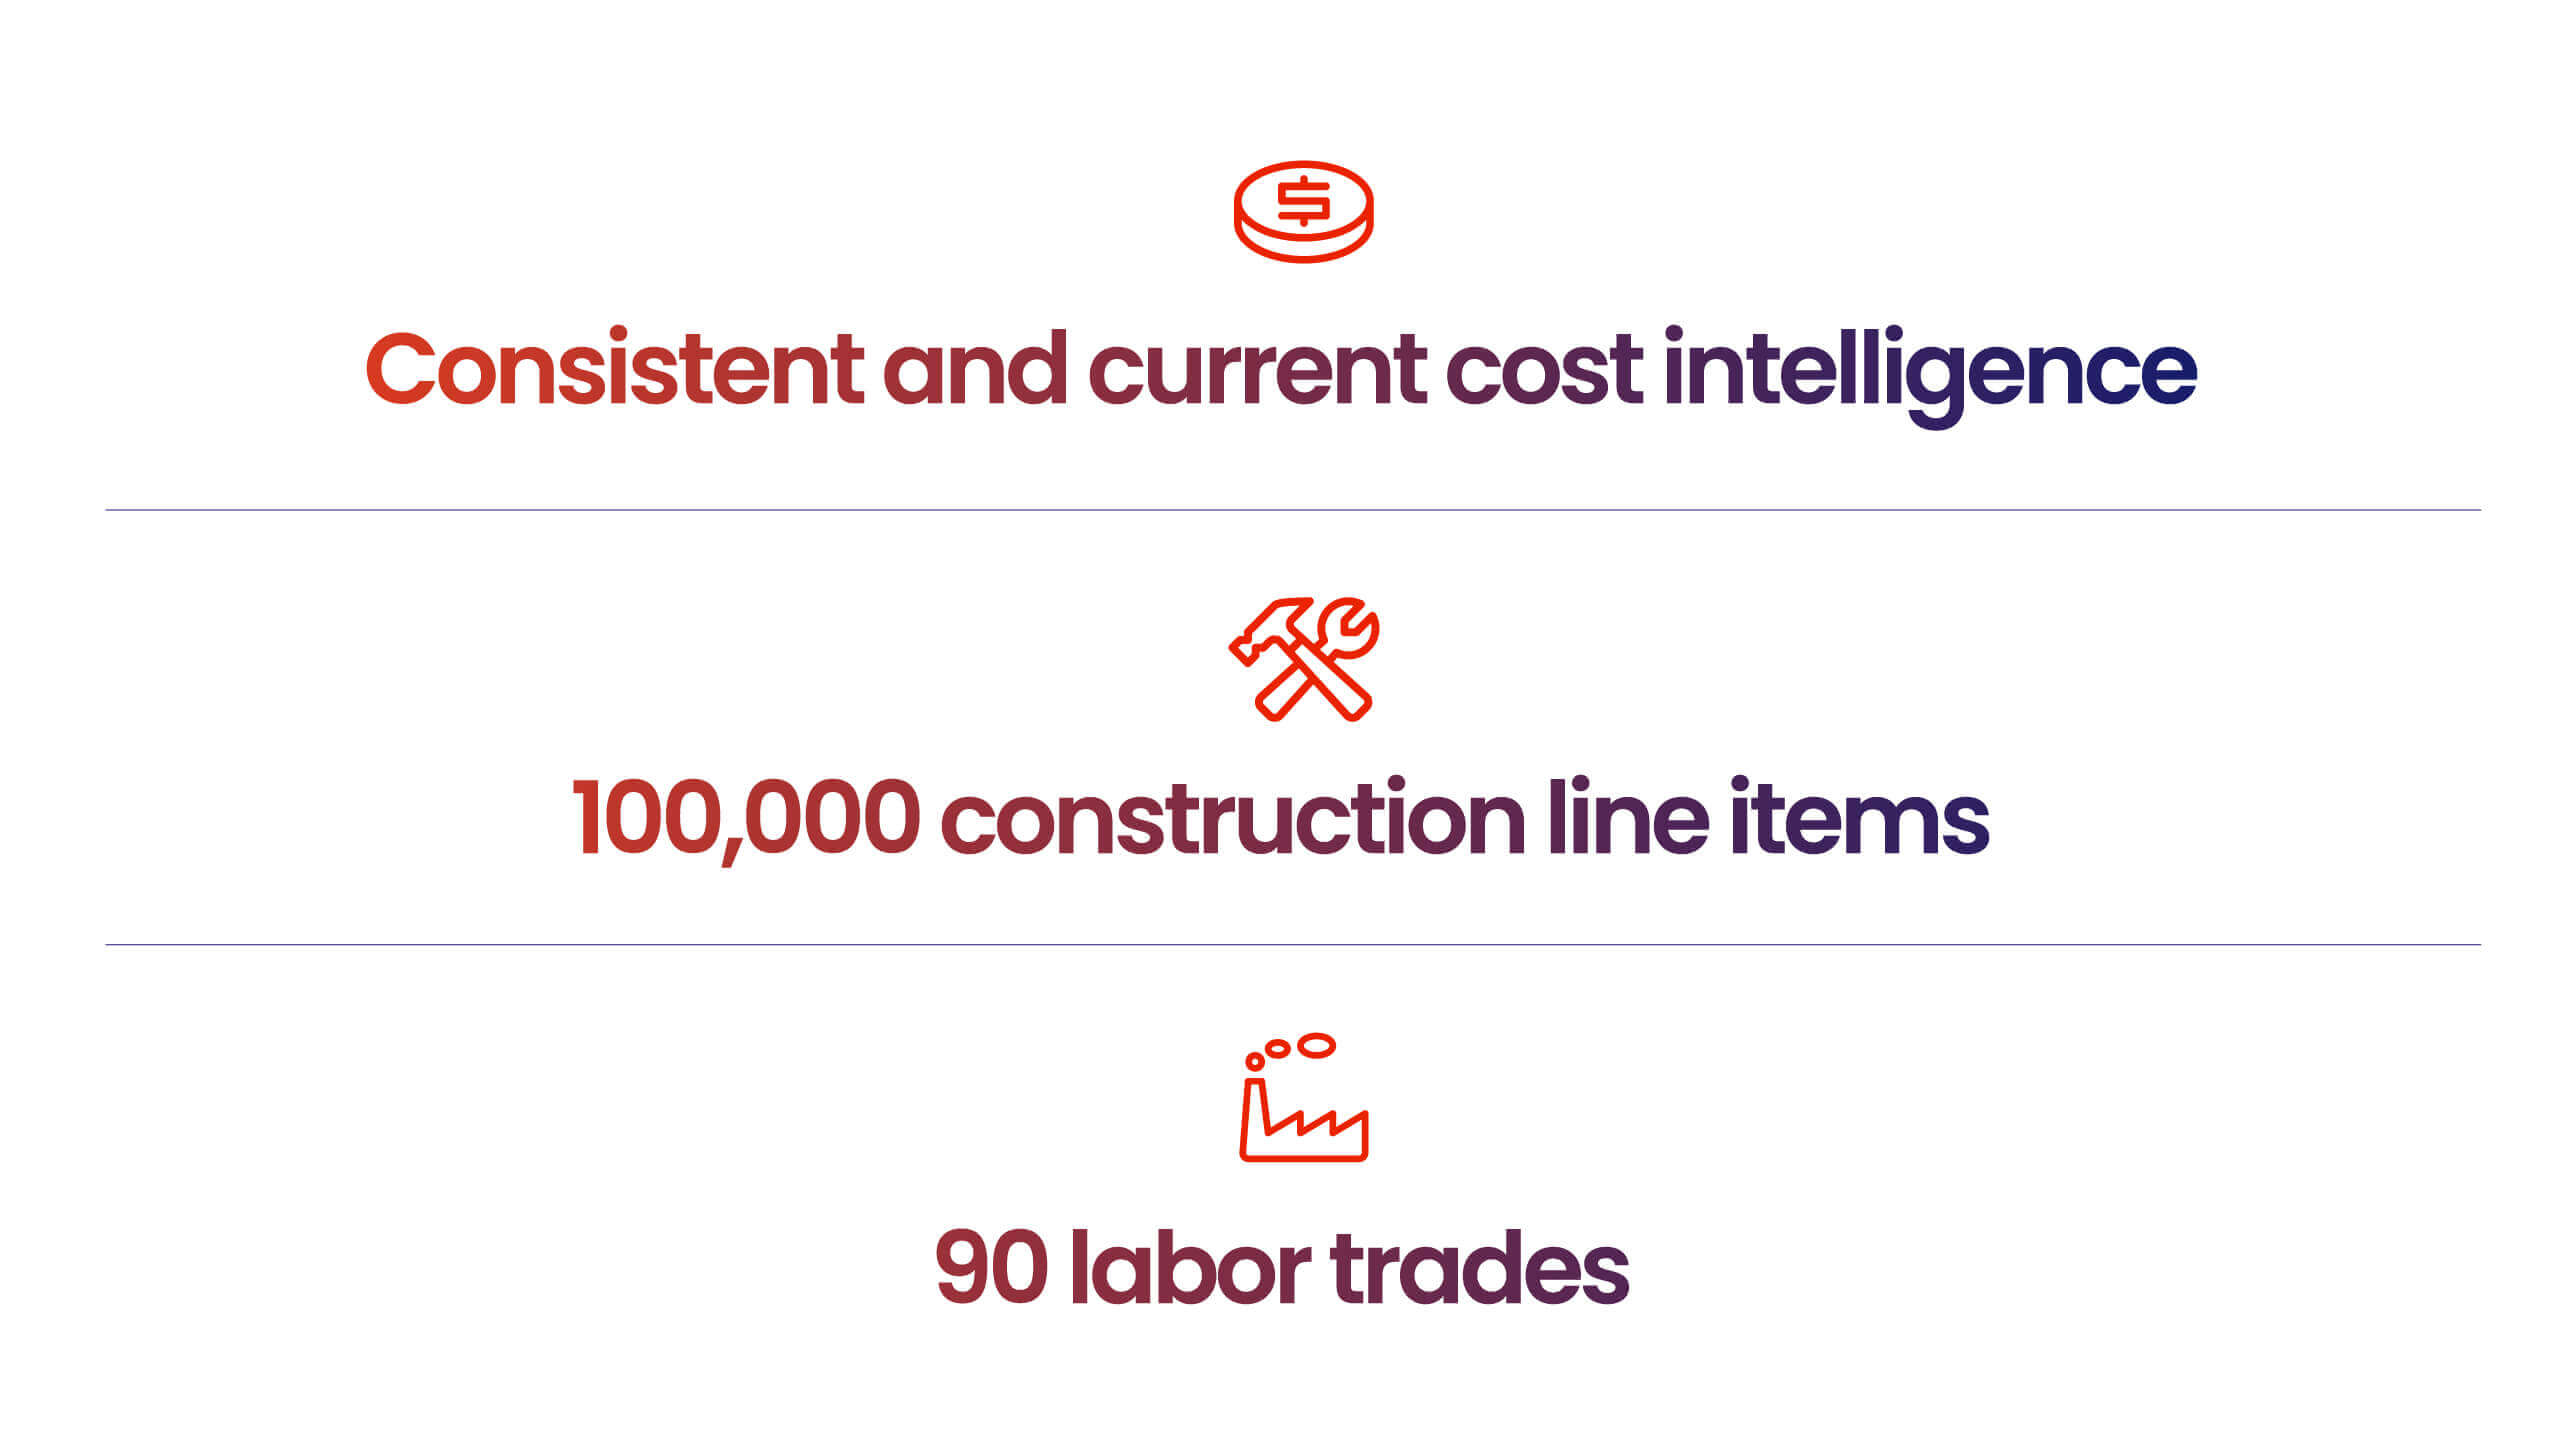 Content Block Image - Support the residential underwriting workflow - consistent and current cost intelligence, 100,000 construction line items, 90 labor trades